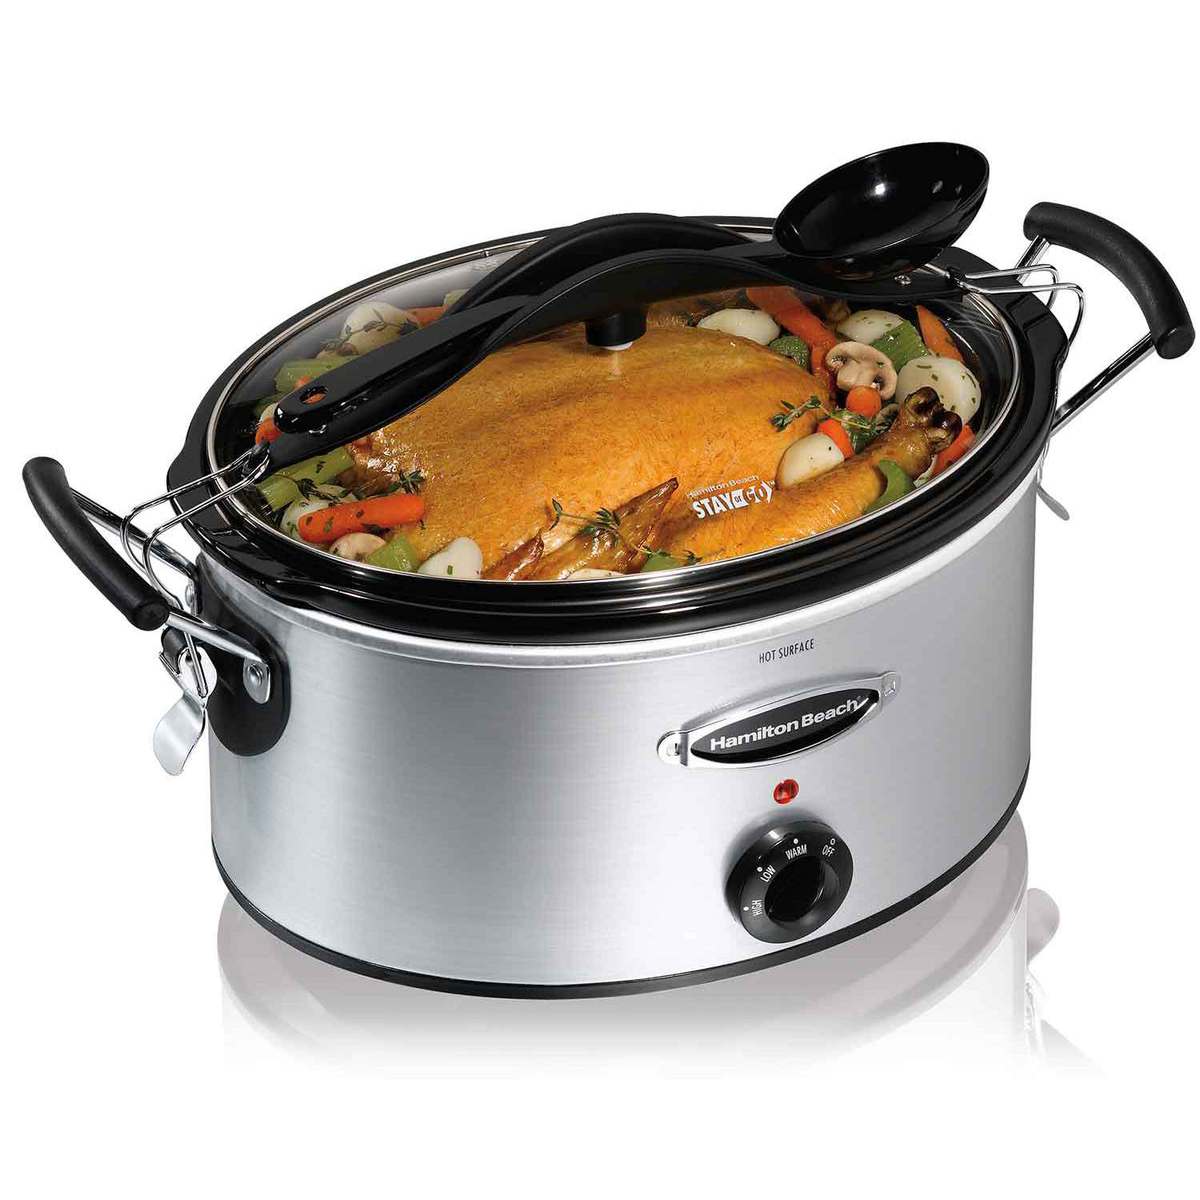 Stay or Go™ 6 Quart Slow Cooker (33162R)